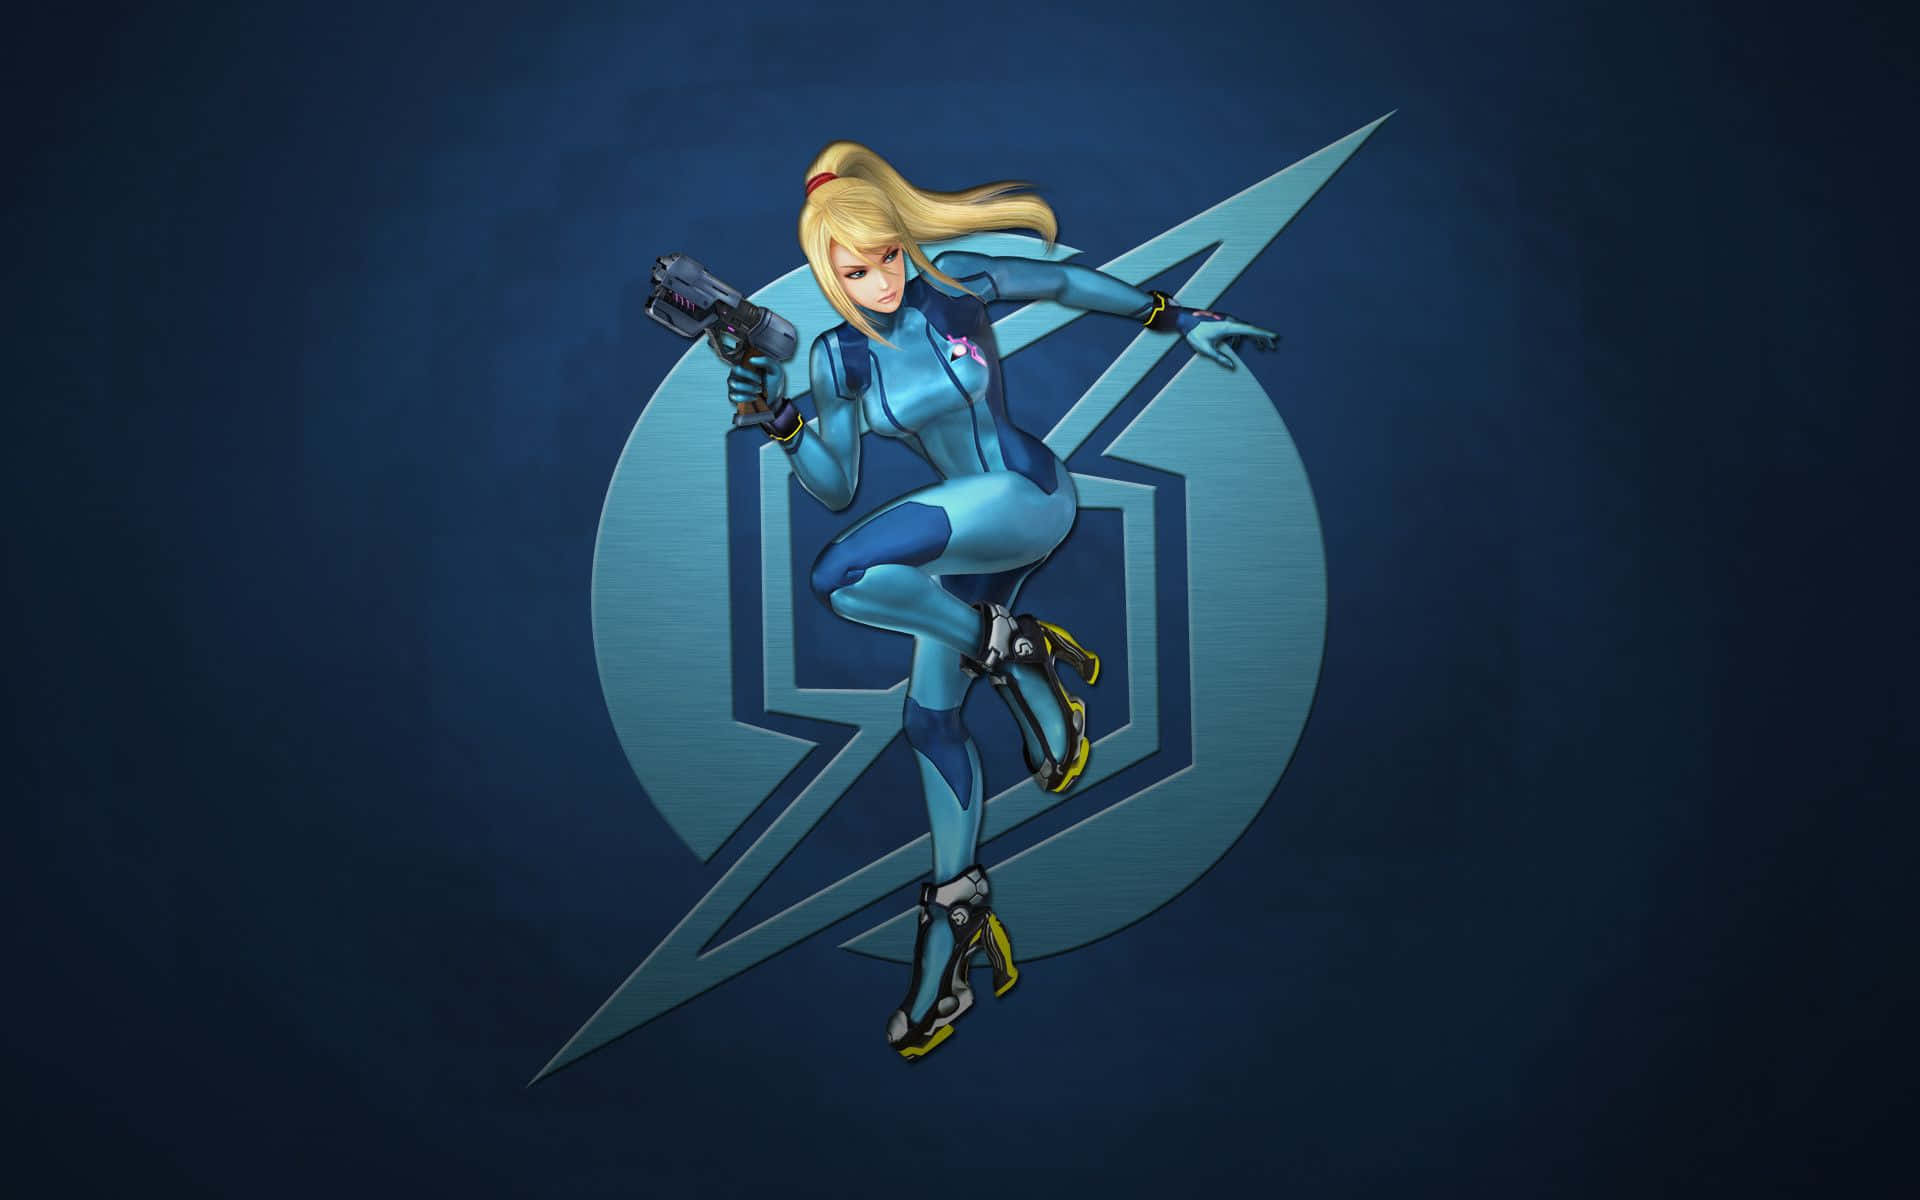 Get Ready For A Battle With Zero Suit Samus Background